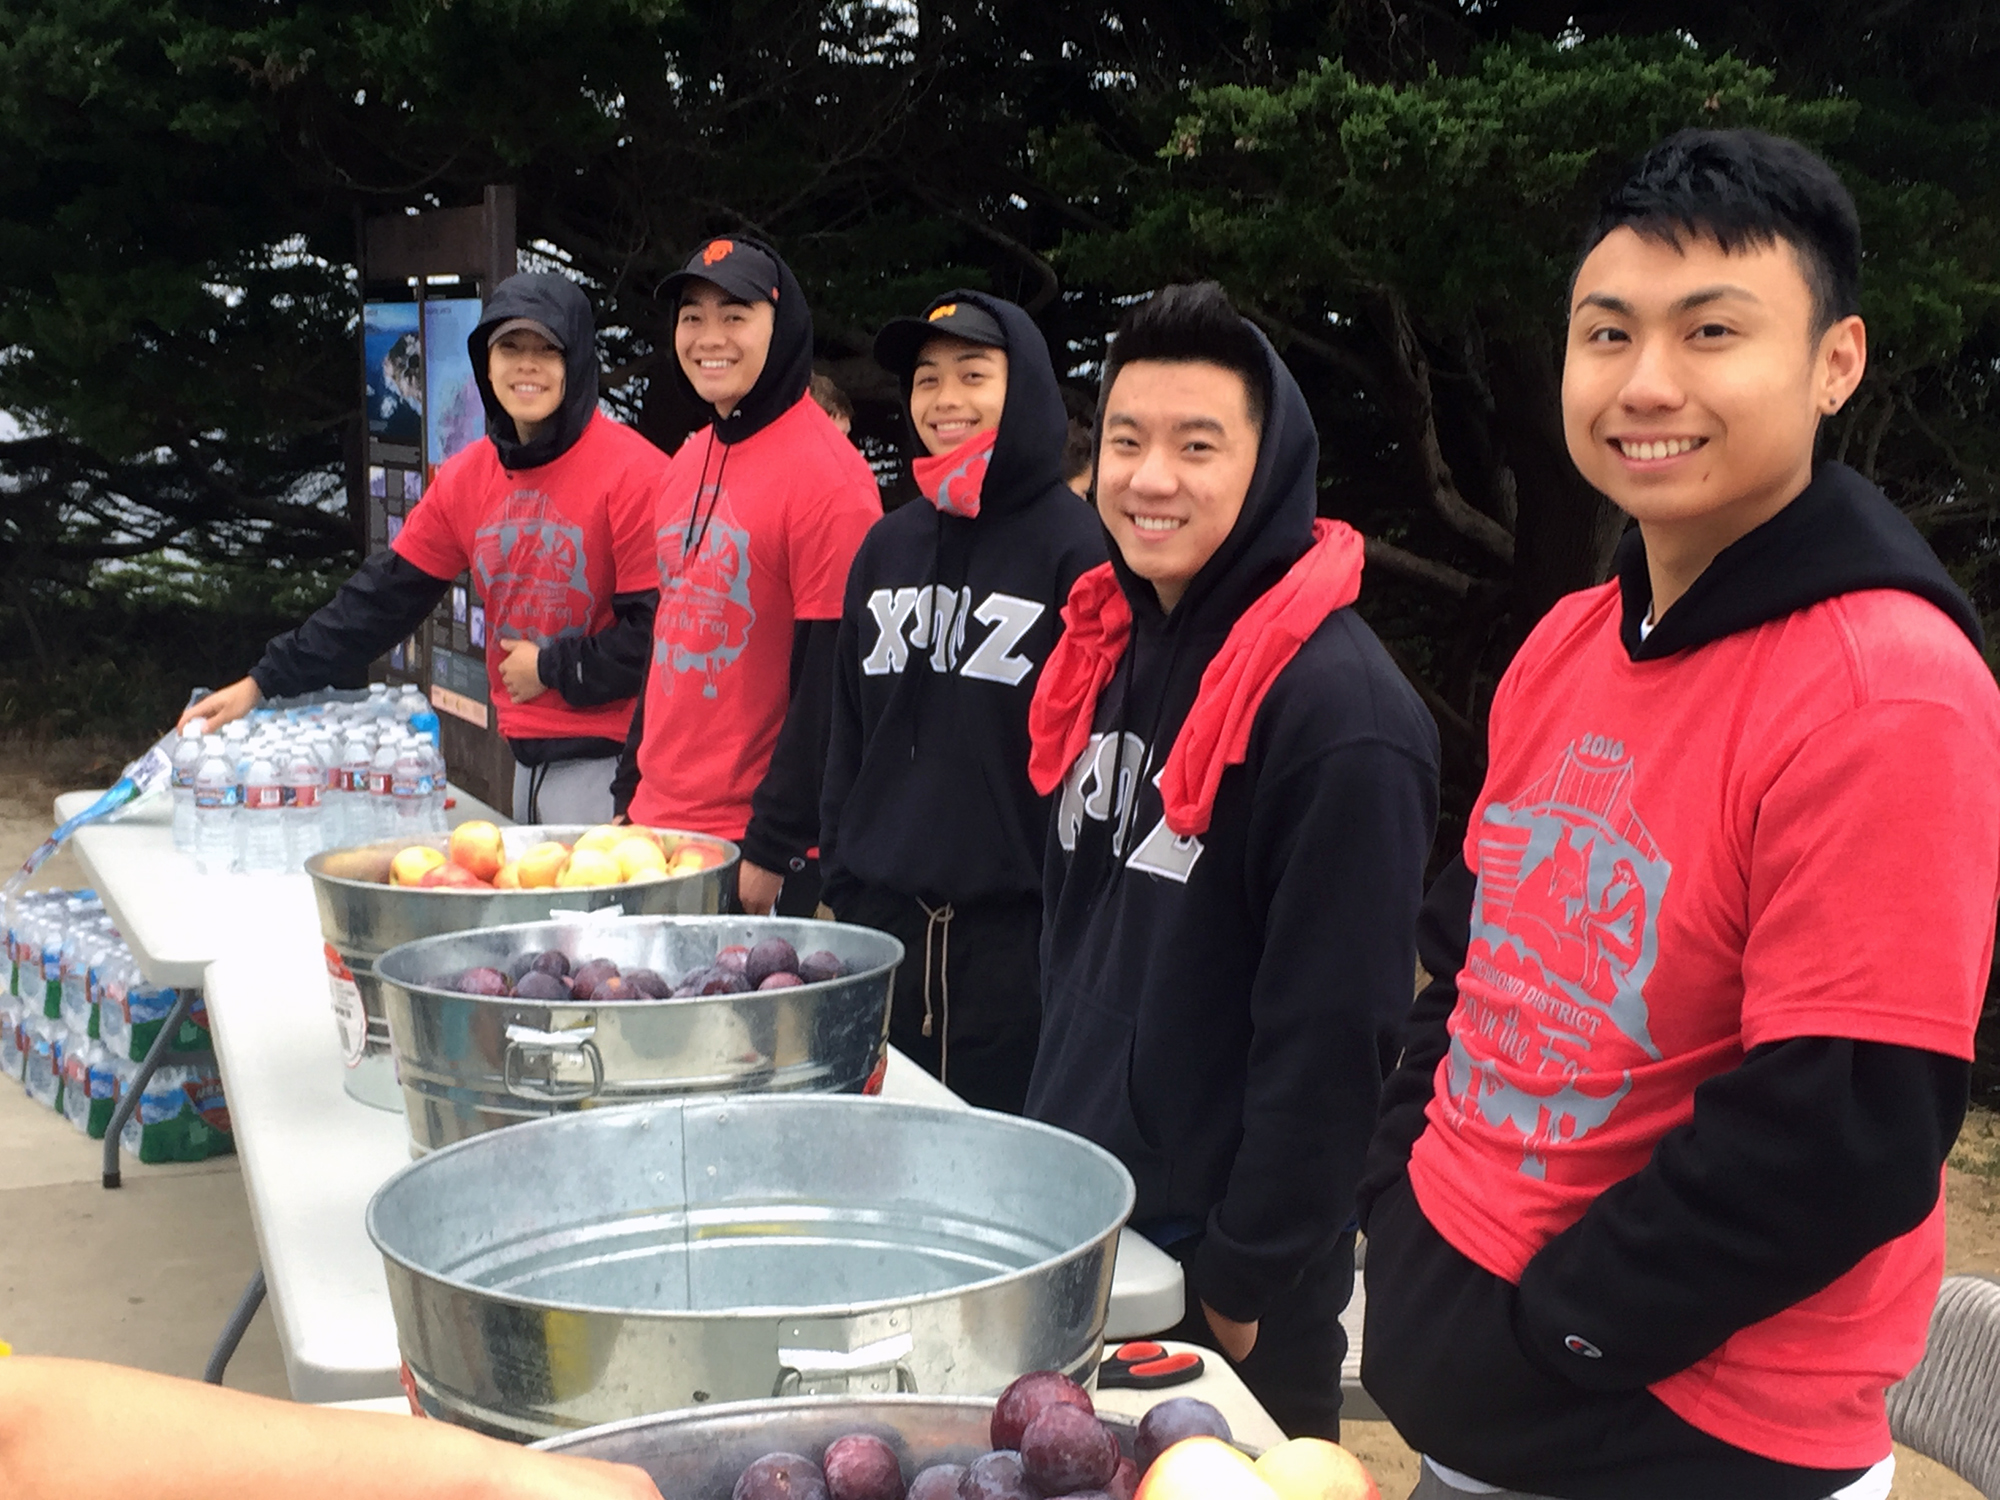 Volunteers from Chi Epsilon fraternity at USF help pass out fruit donated by Grocery Outlet